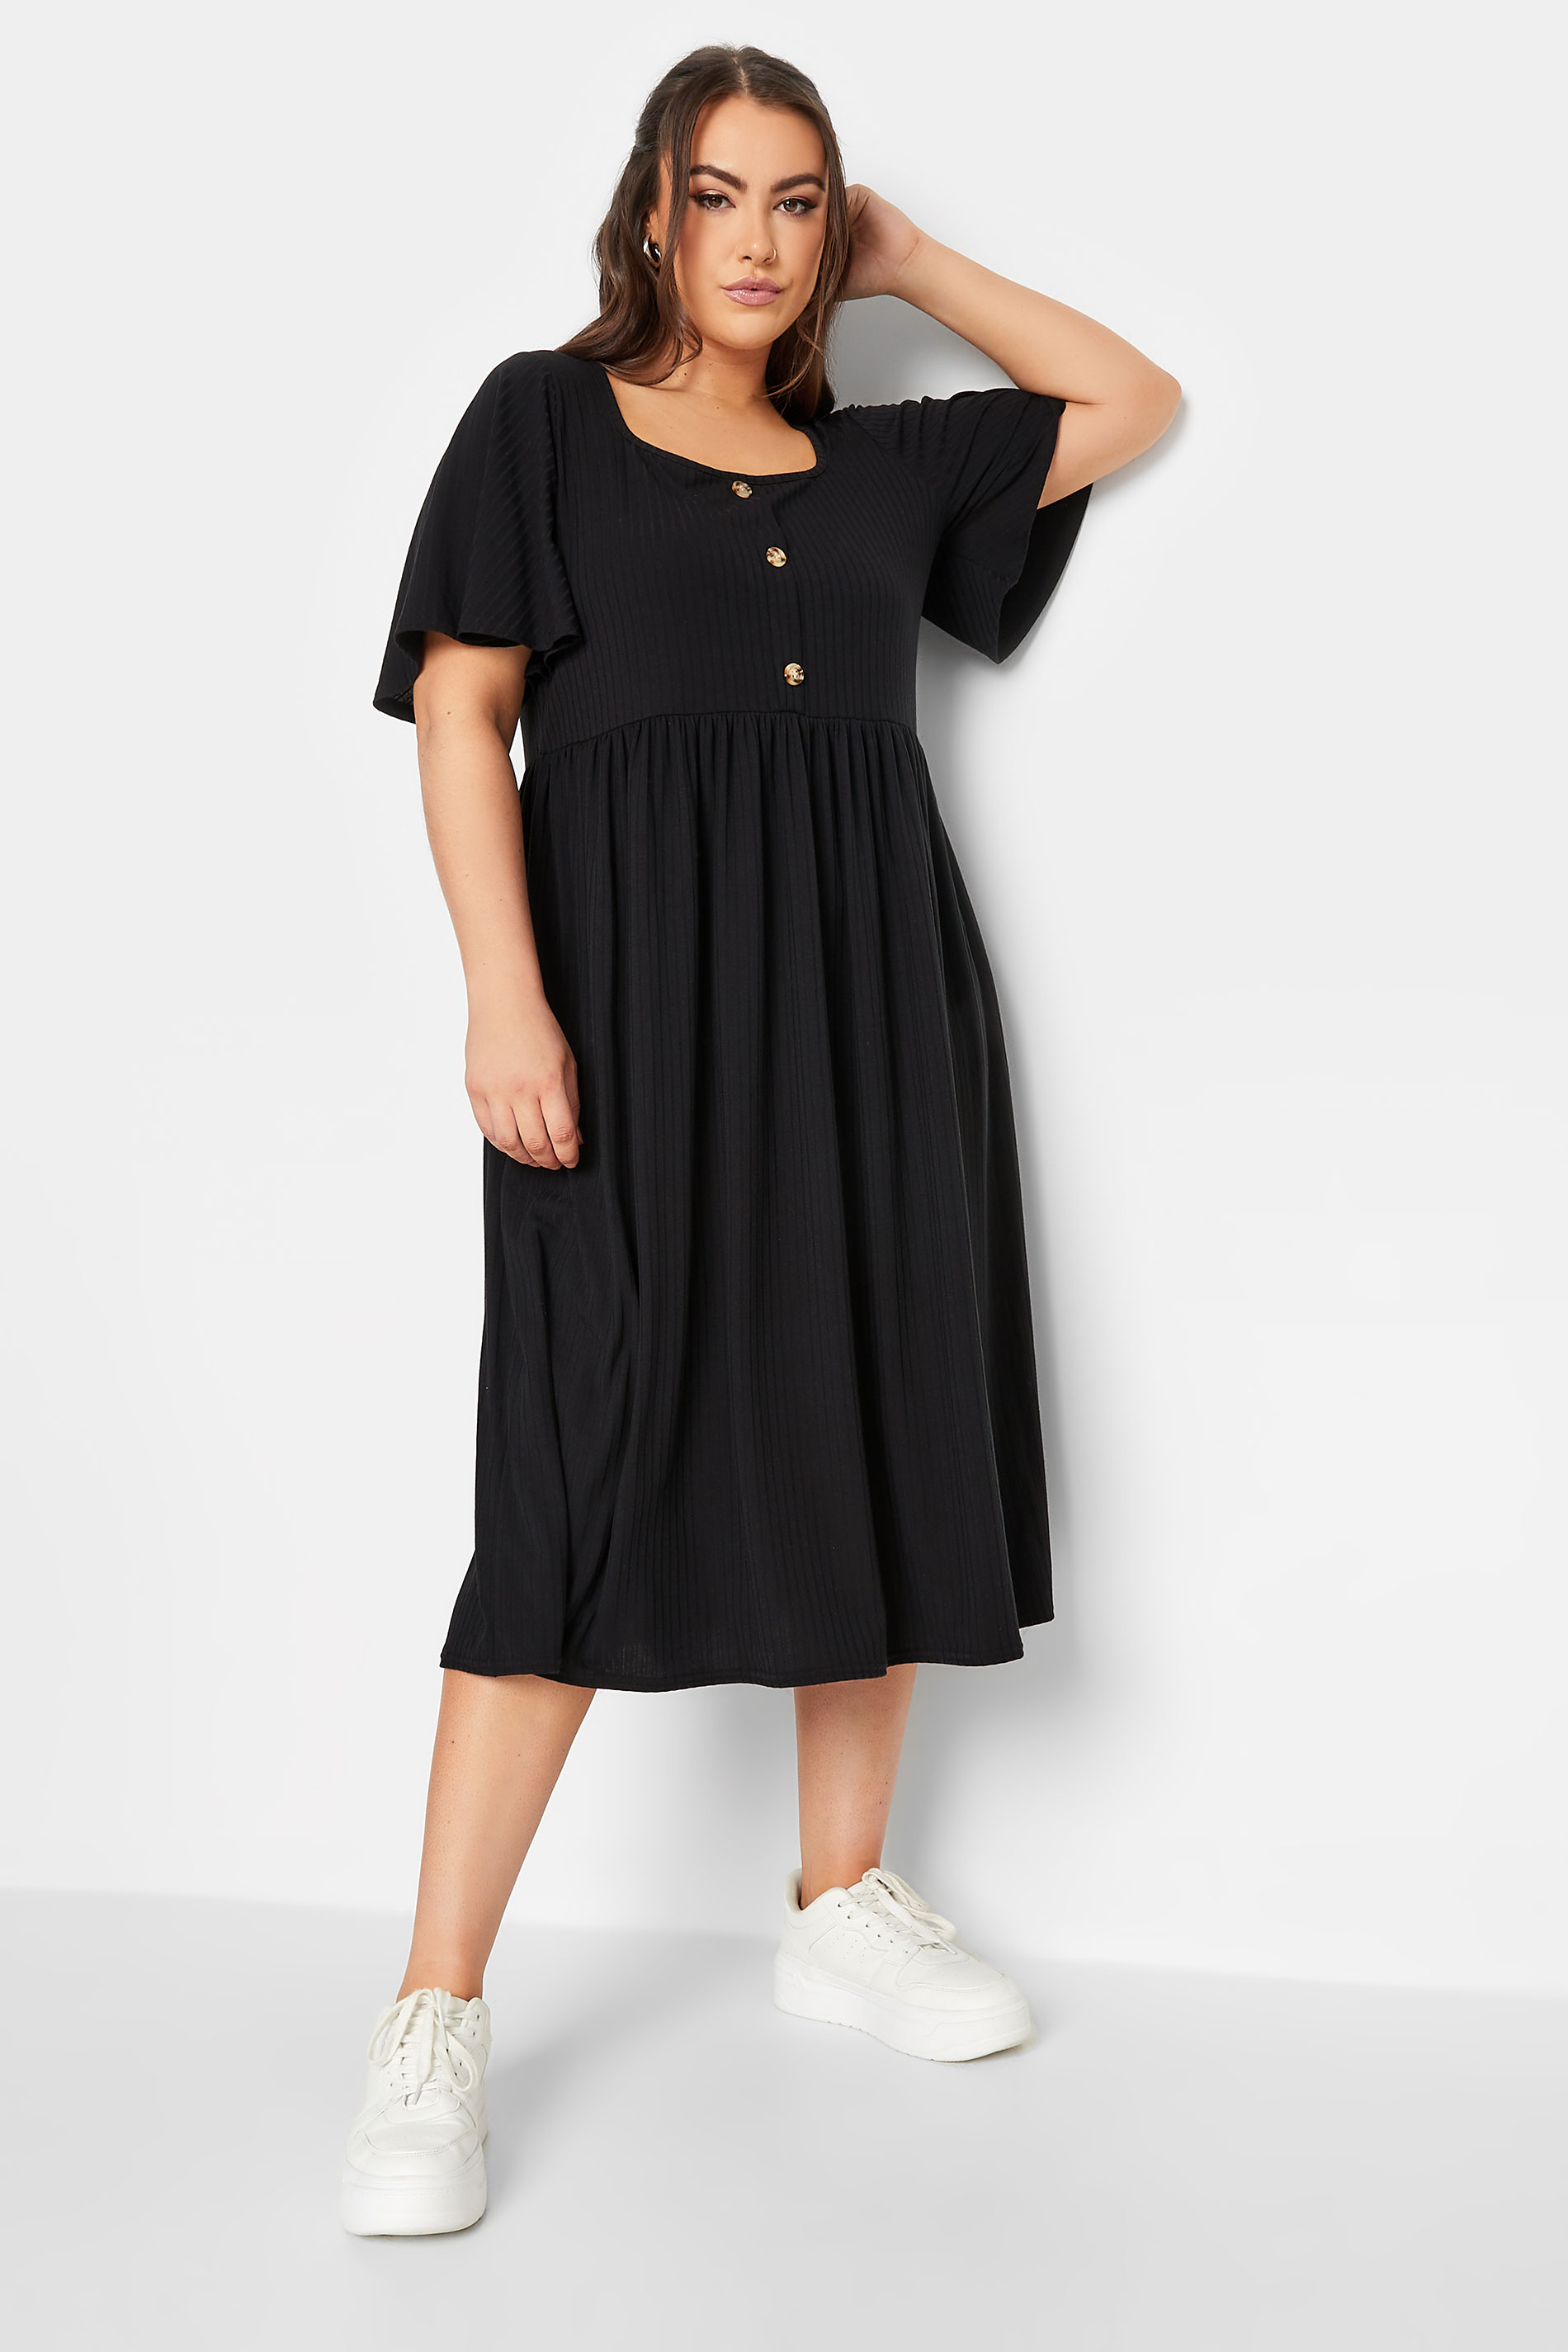 LIMITED COLLECTION Plus Size Black Ribbed Square Neck Midi Dress | Yours Clothing 1